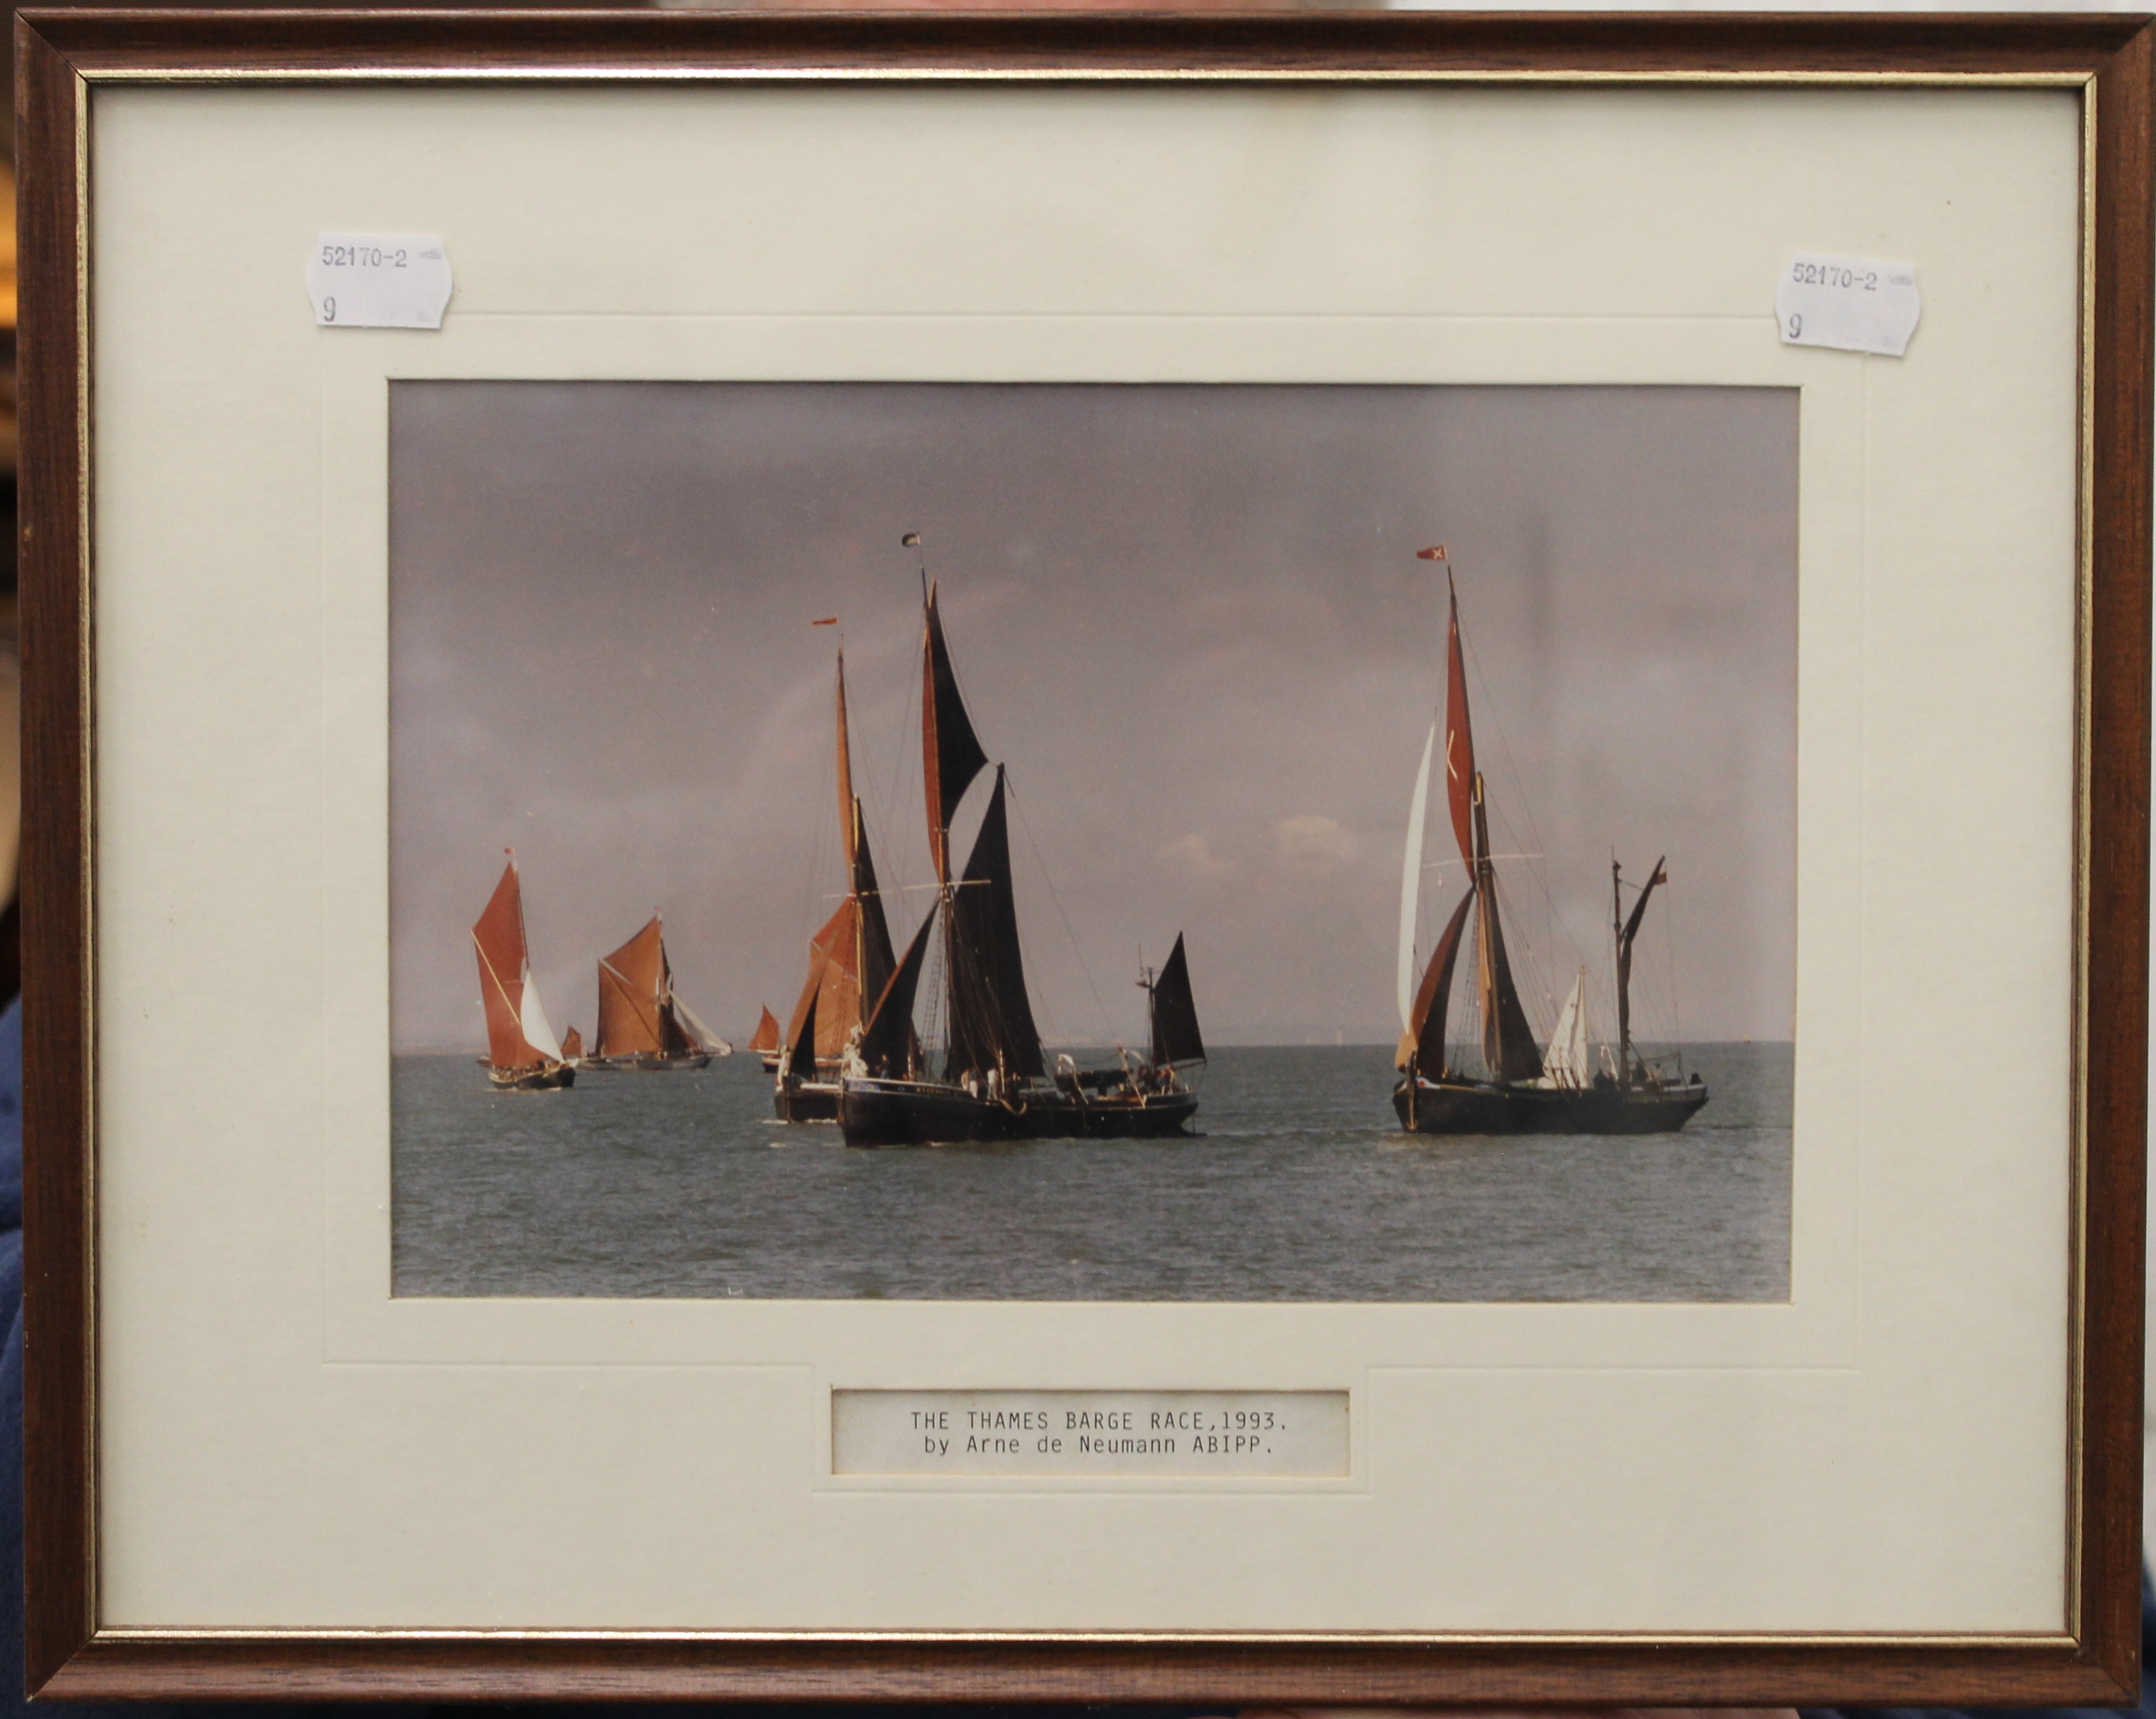 An antique map of Dorset and a framed Thames Barge Race photograph. The former 52 x 40.5 cm. - Image 4 of 4